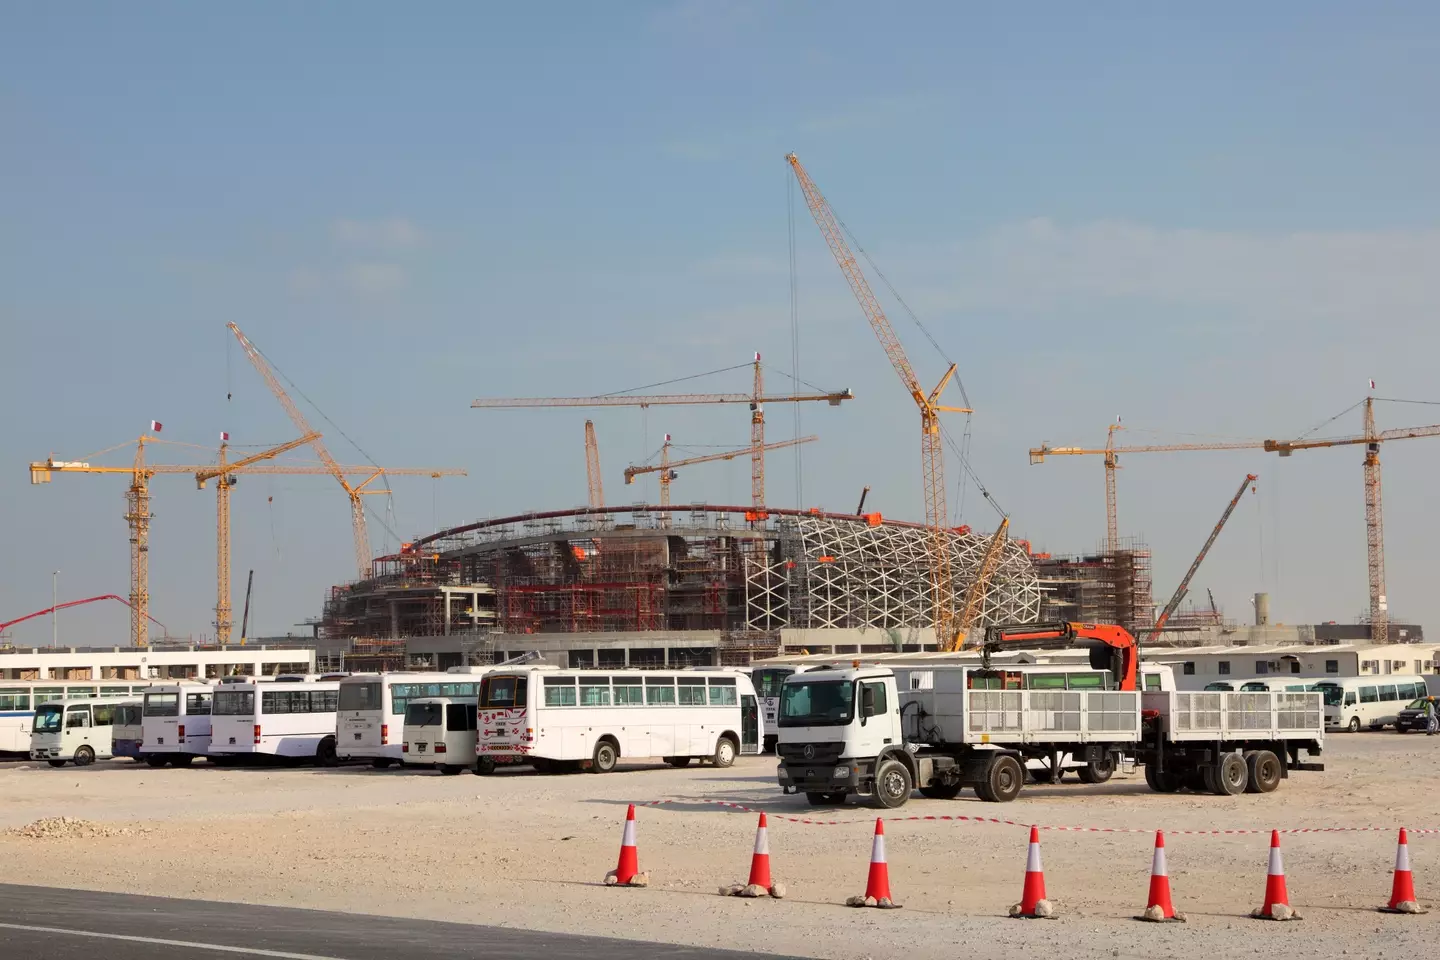 A stadium being constructed in Qatar. (Image